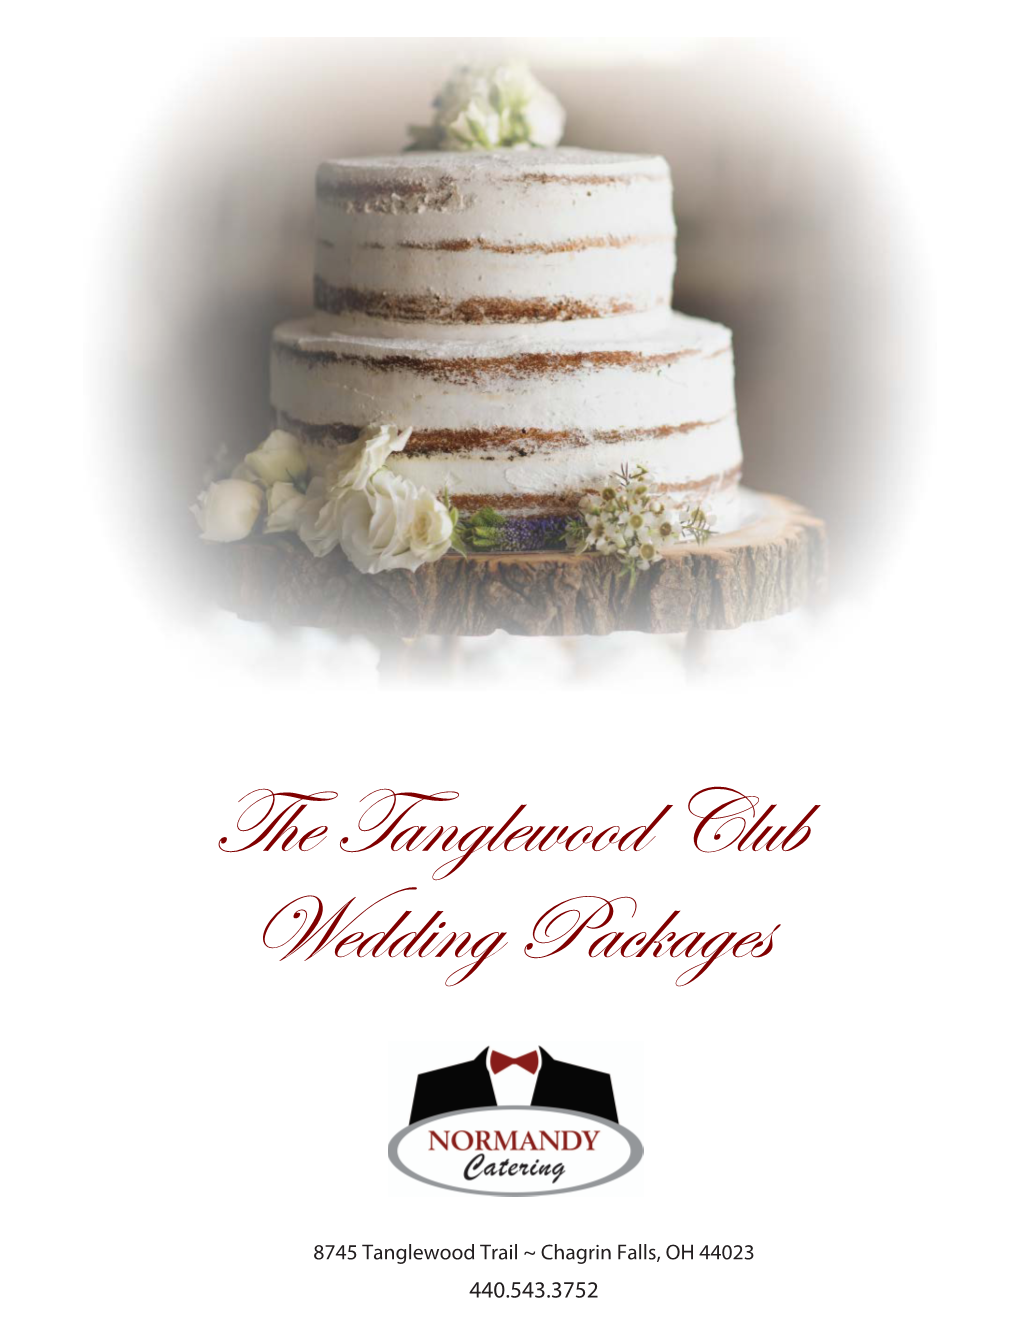 The Tanglewood Club Wedding Packages